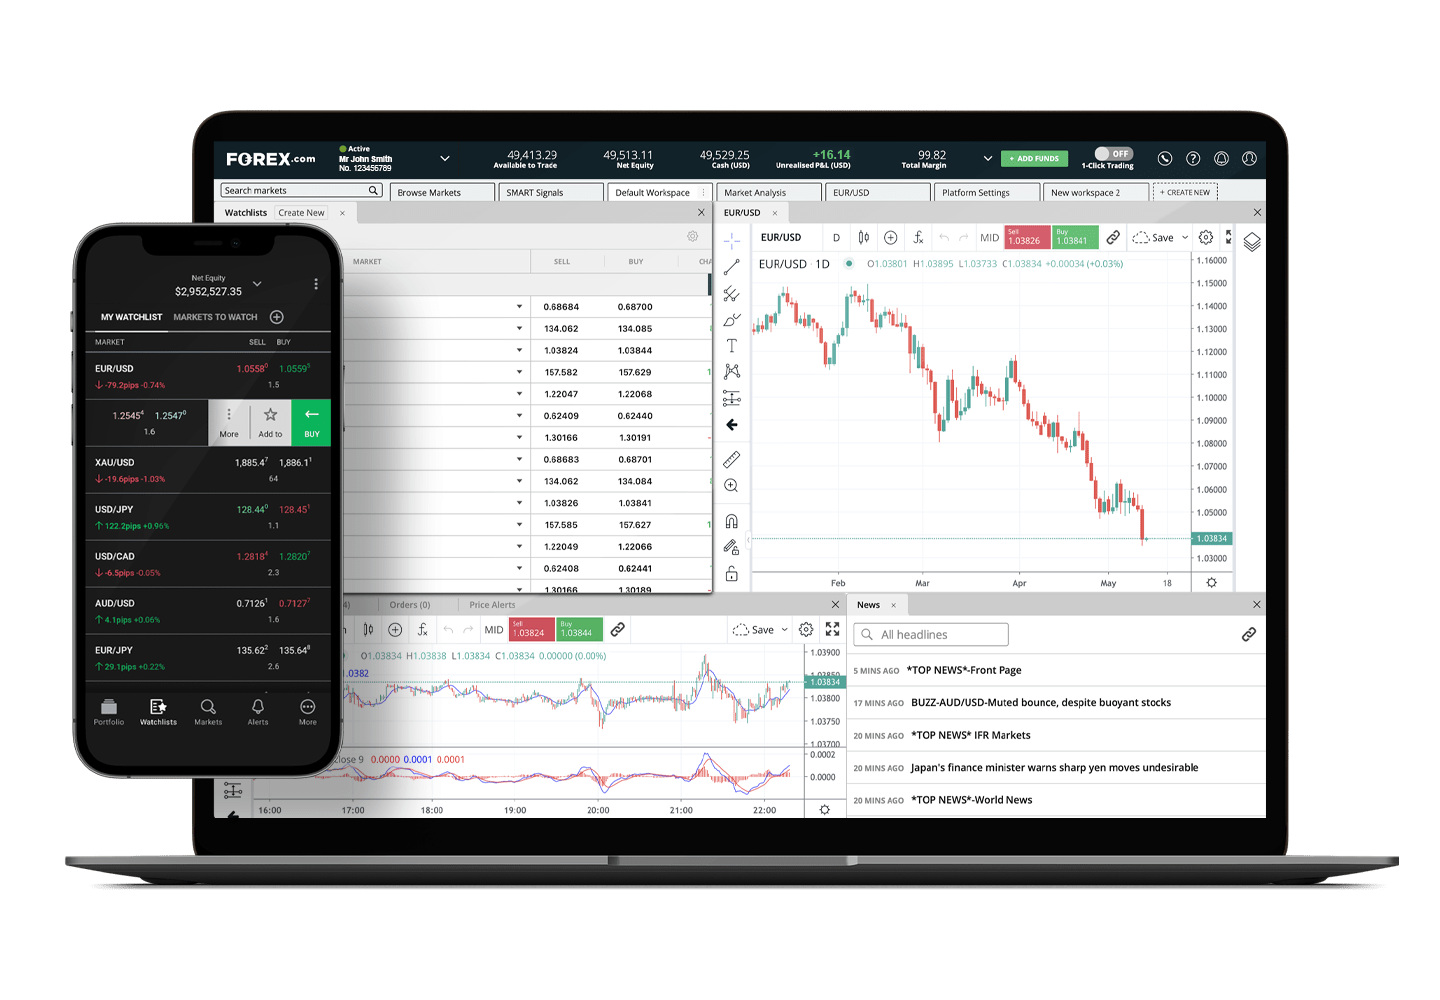 Powerful Trading Platforms and Mobile Trading Apps - FOREX.com